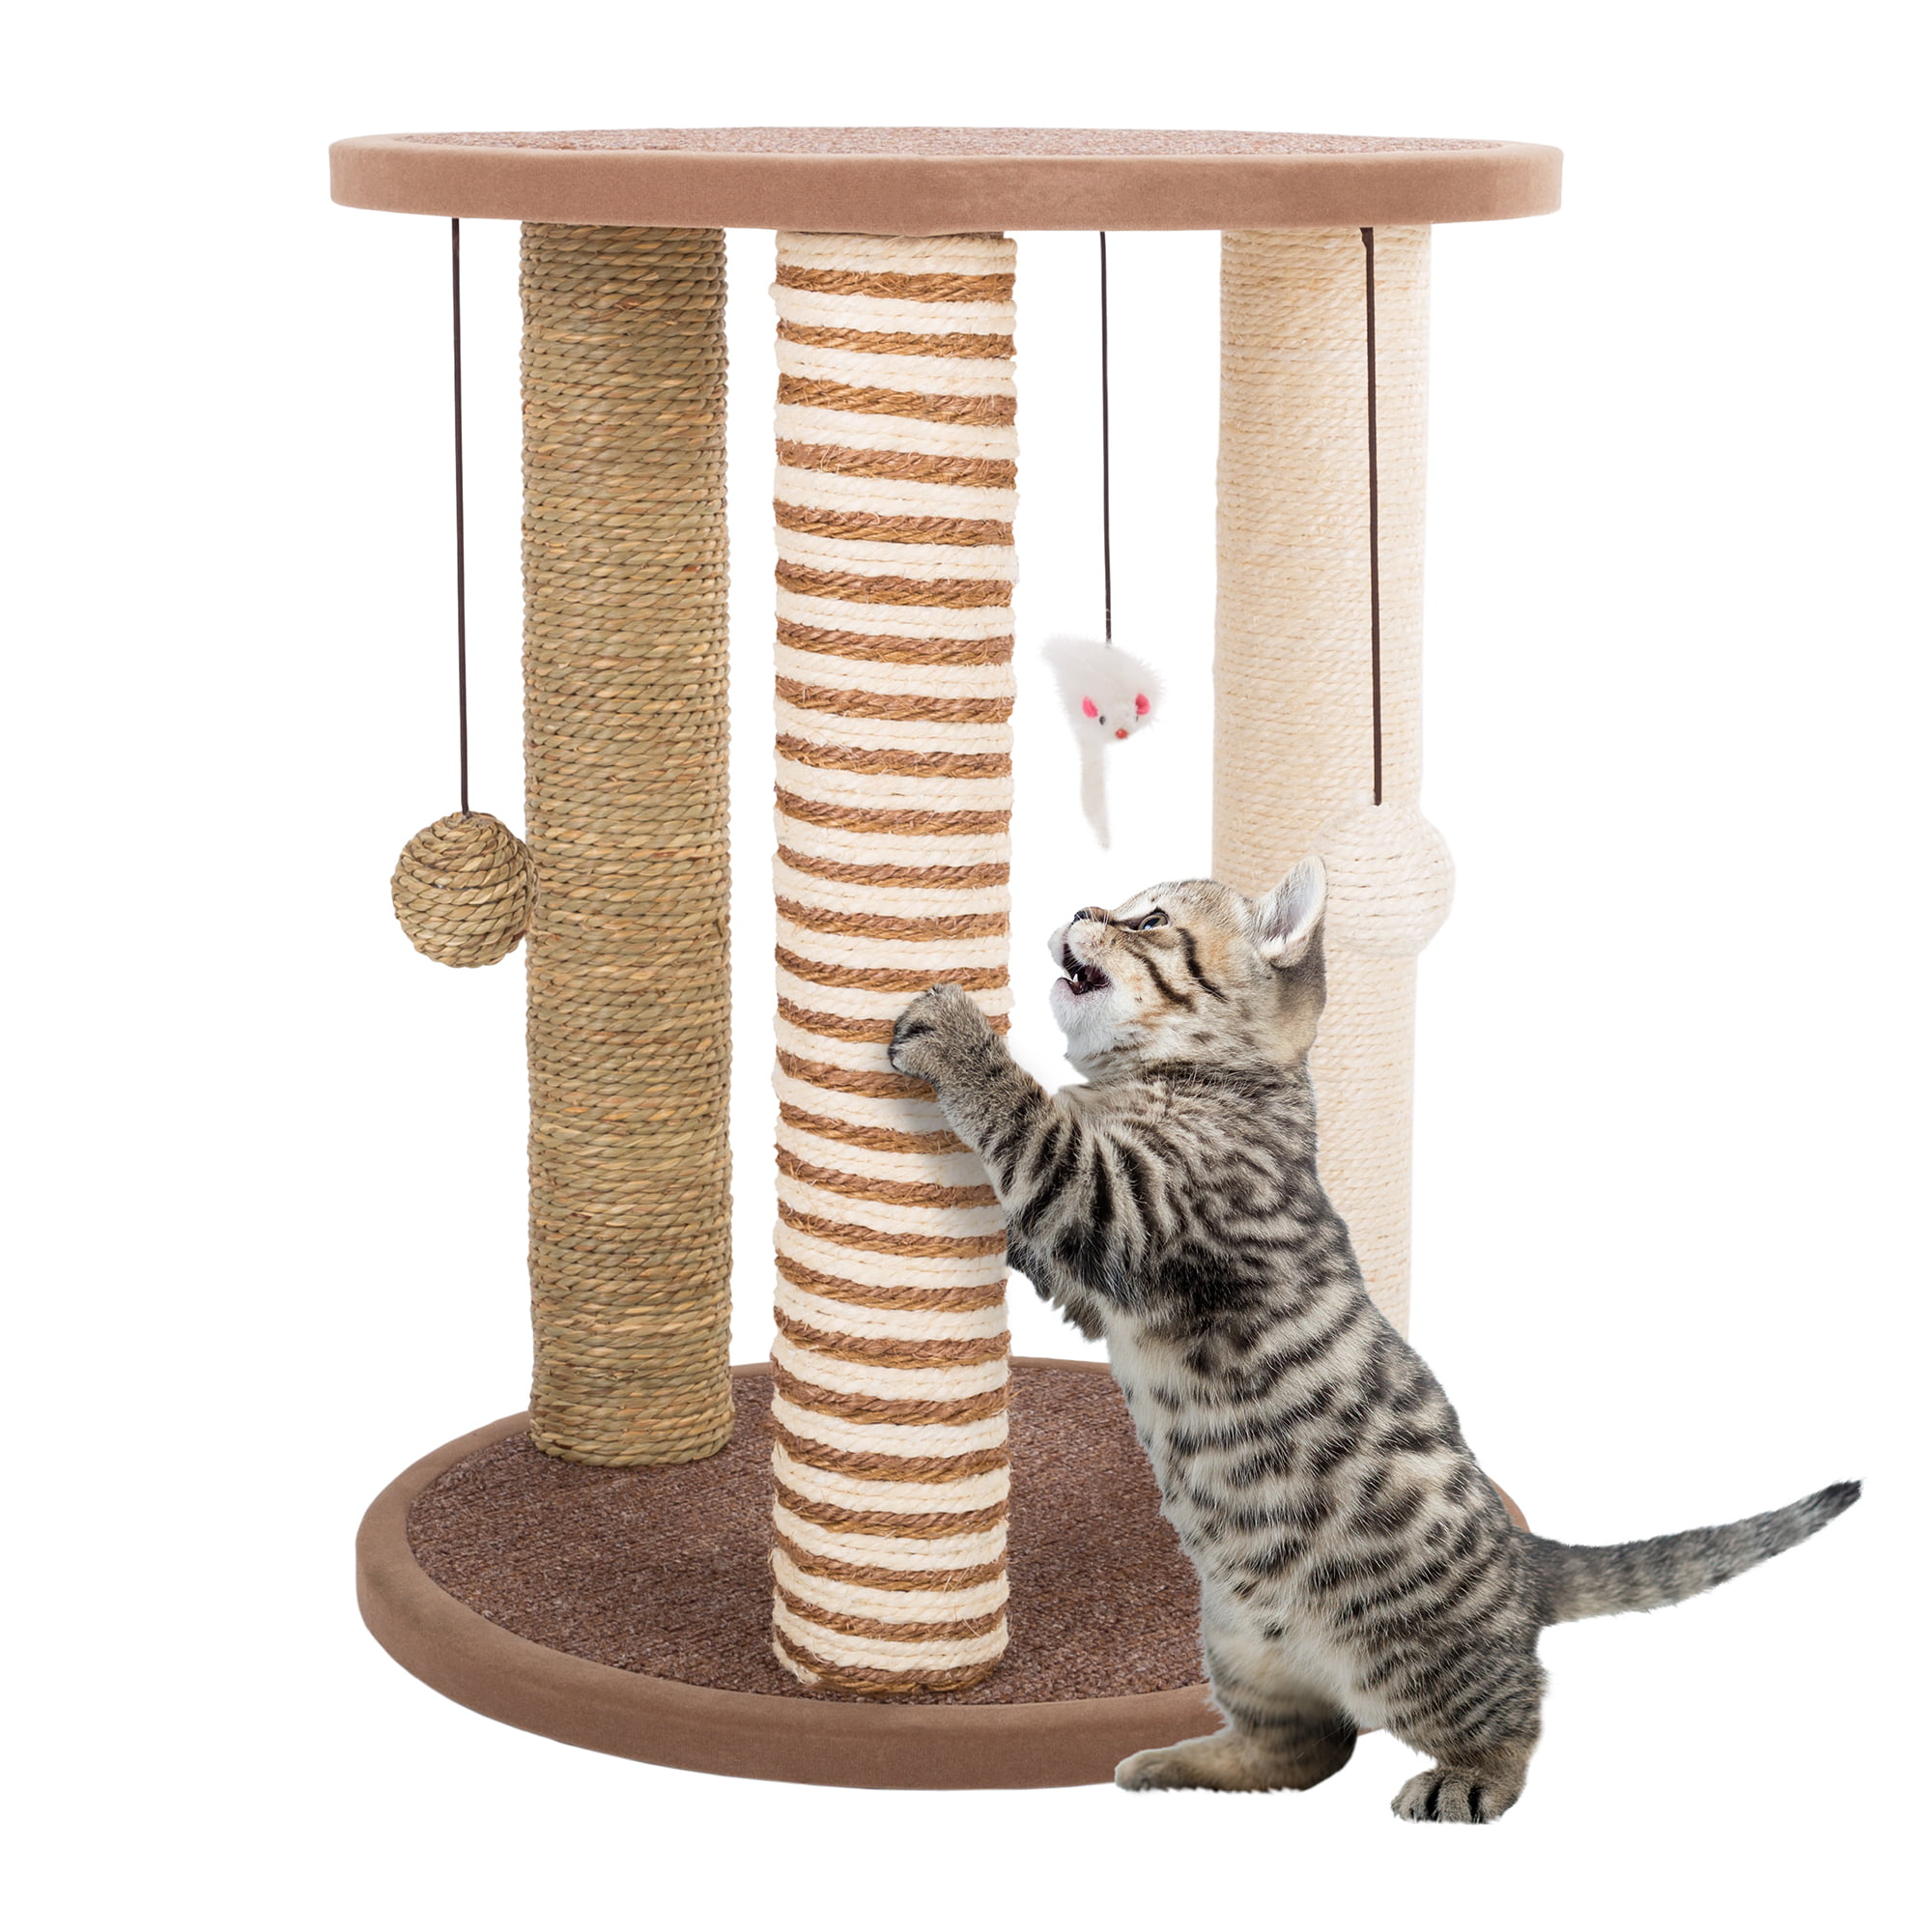 Cat toy Cat Scratcher Toys for Cats  Cat scratching